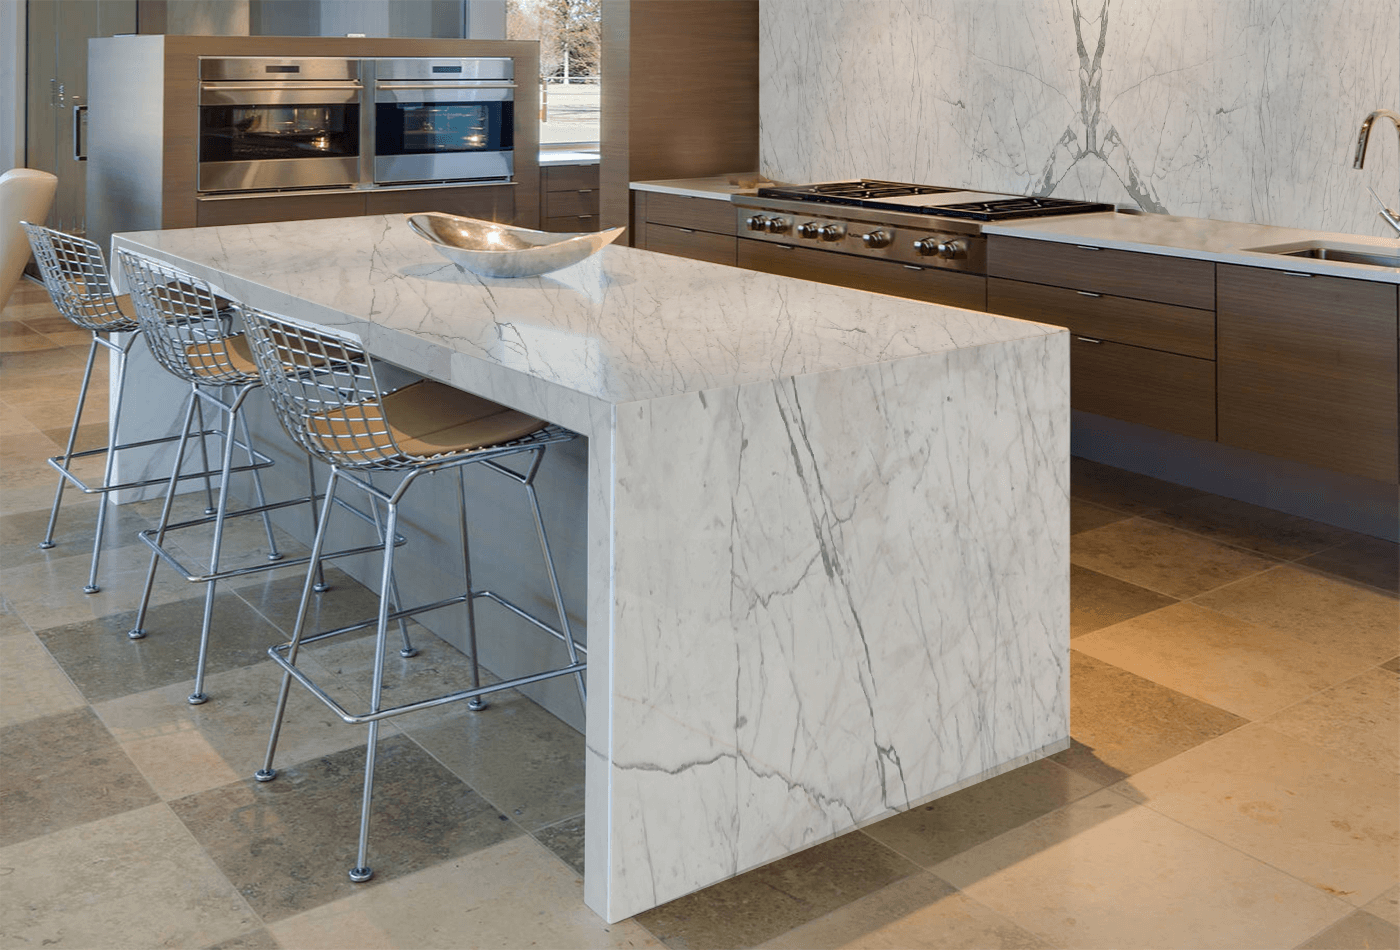 Statuario Marble Popular In Demand Among Homeowners